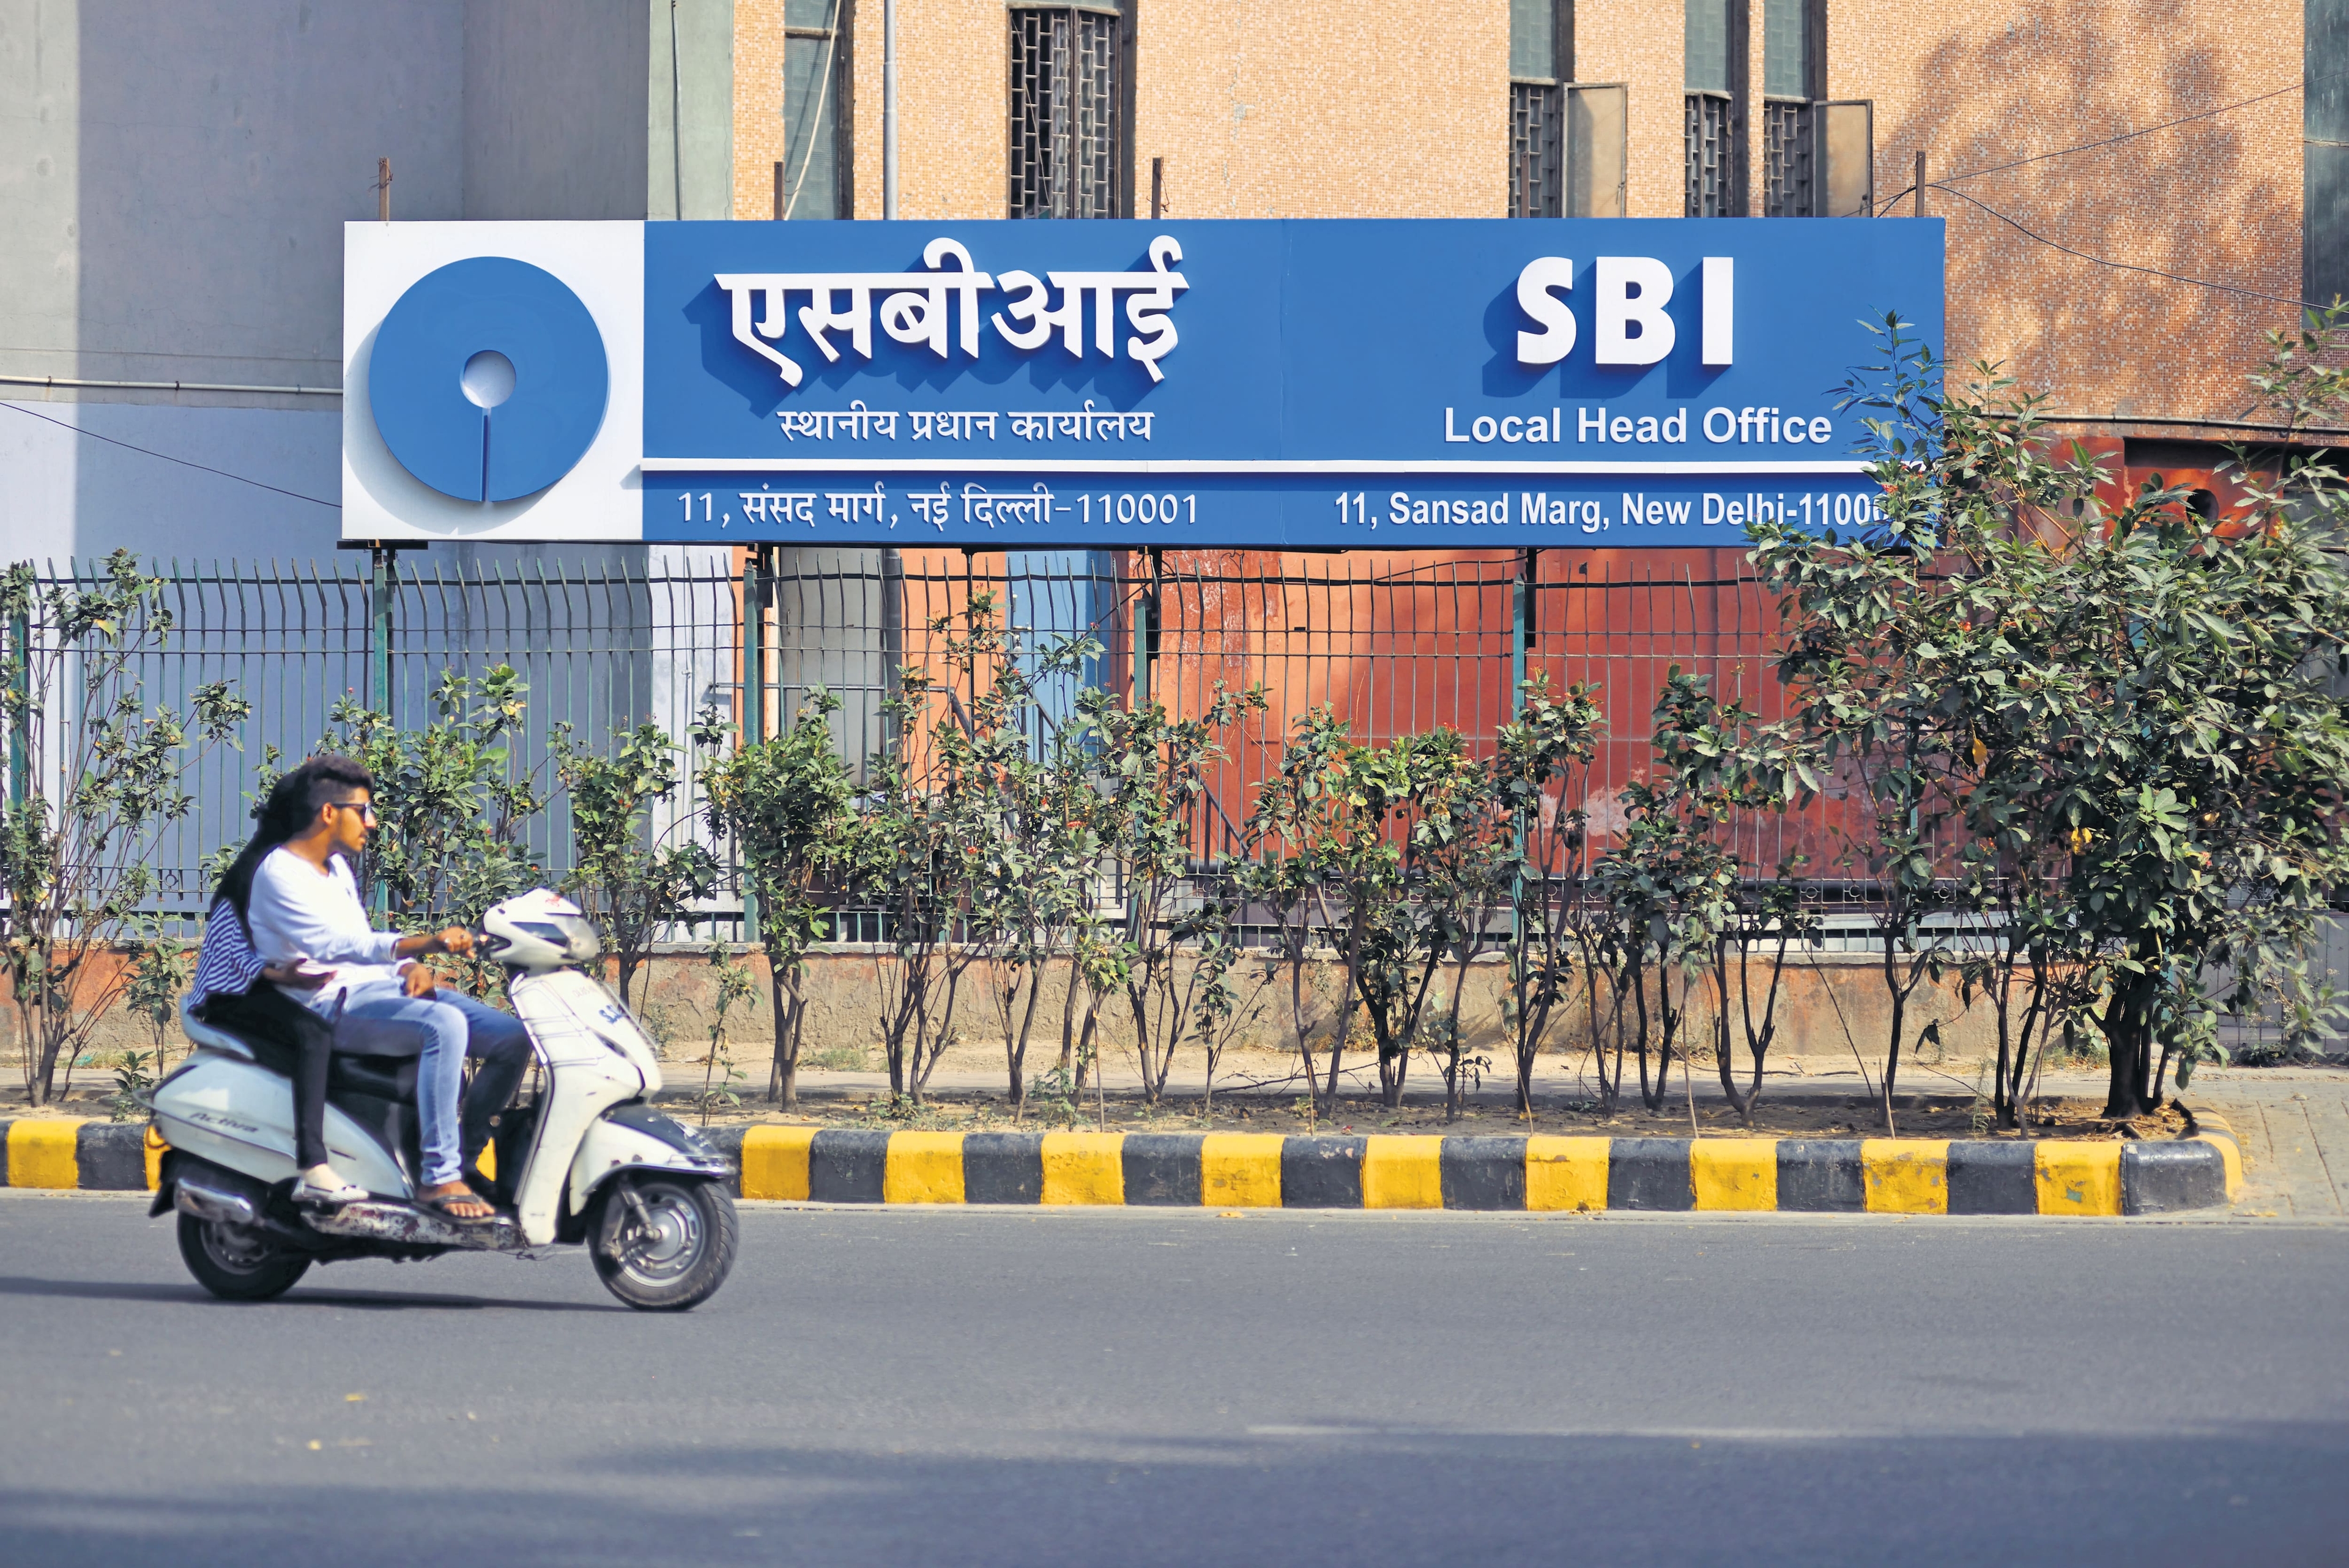 Most brokerages remain optimistic about the long-term prospects of SBI.